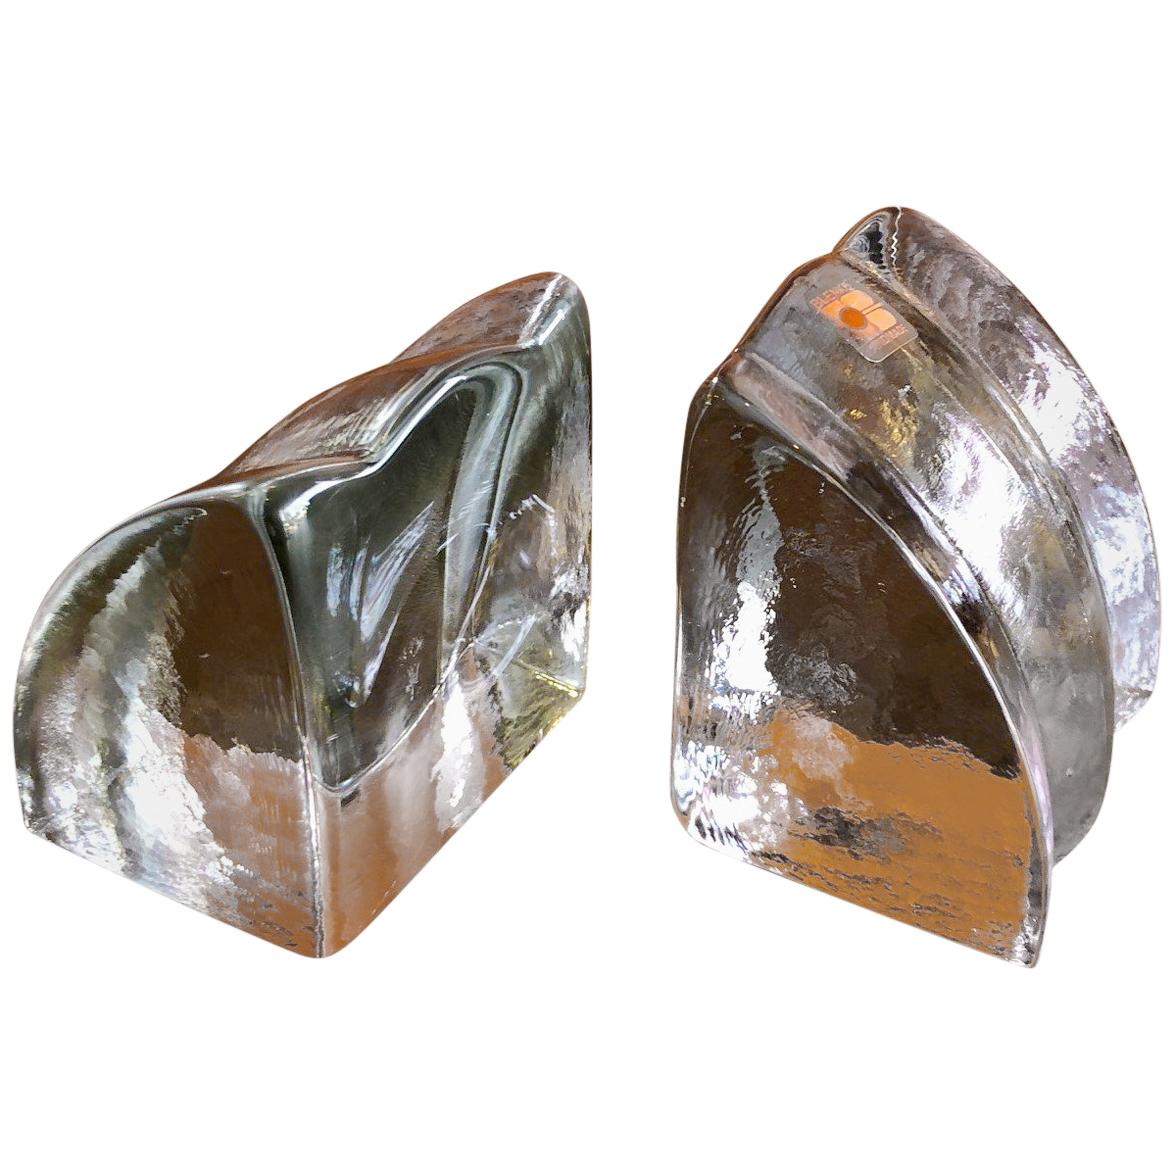 Quarter Circle Wedge Clear Glass Bookends by Blenko